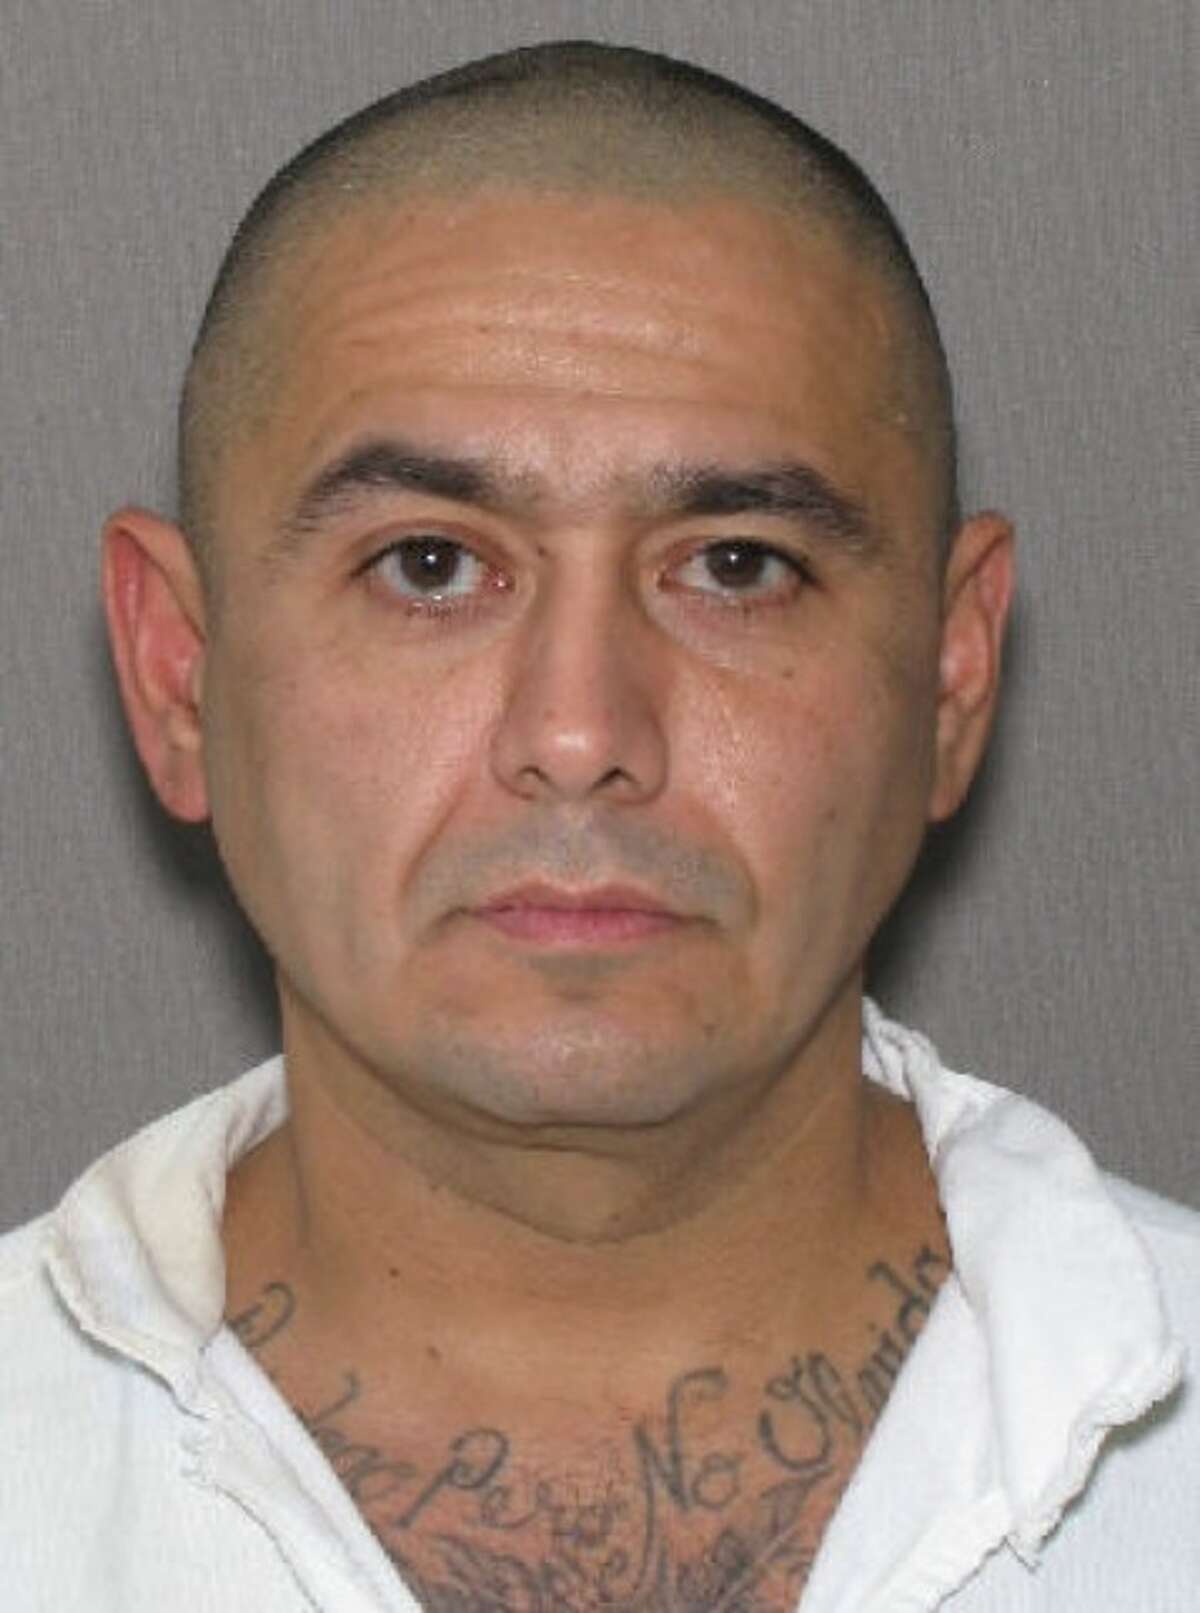 Ramon Mendoza Jr., 45, is wanted for vehicle theft, engaging in organized criminal activity, theft of property and conspiracy to commit theft of property.